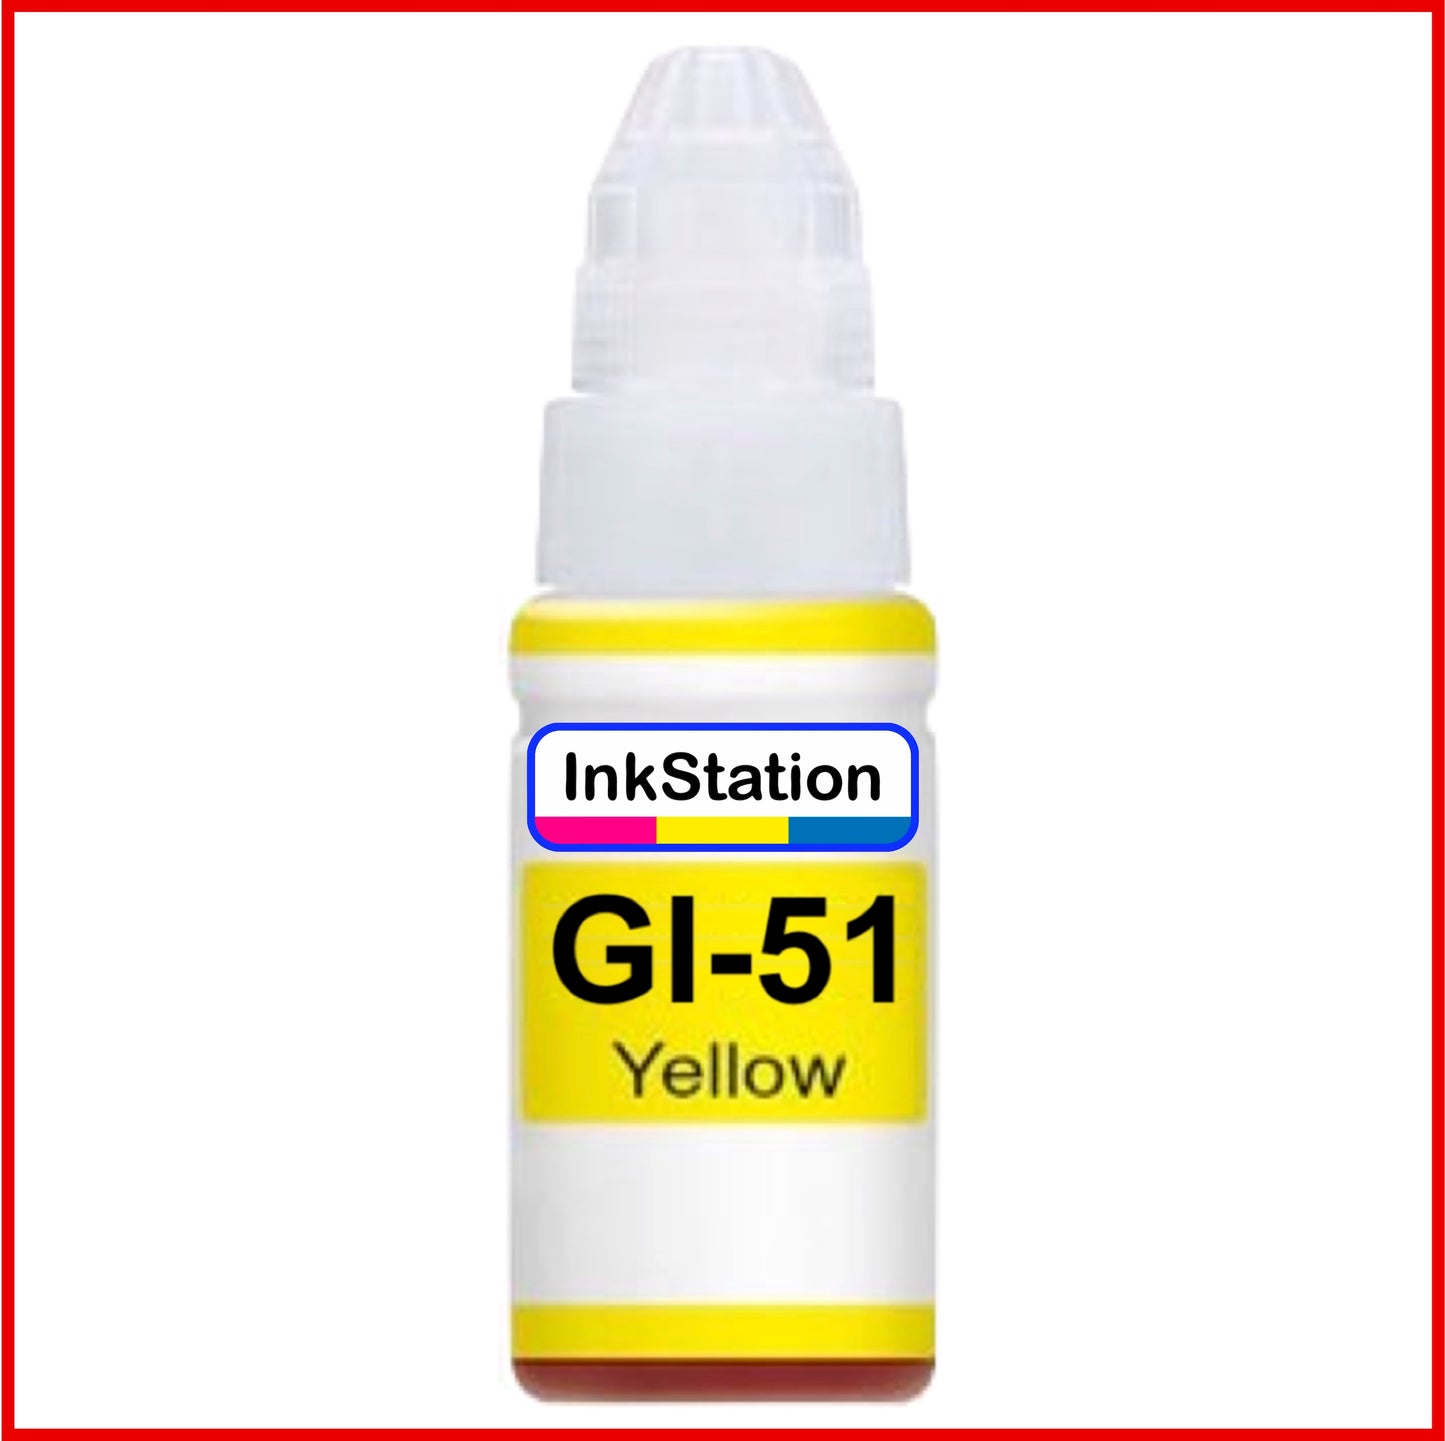 Compatible Yellow Ink Bottles for GI-51 Canon Pixma